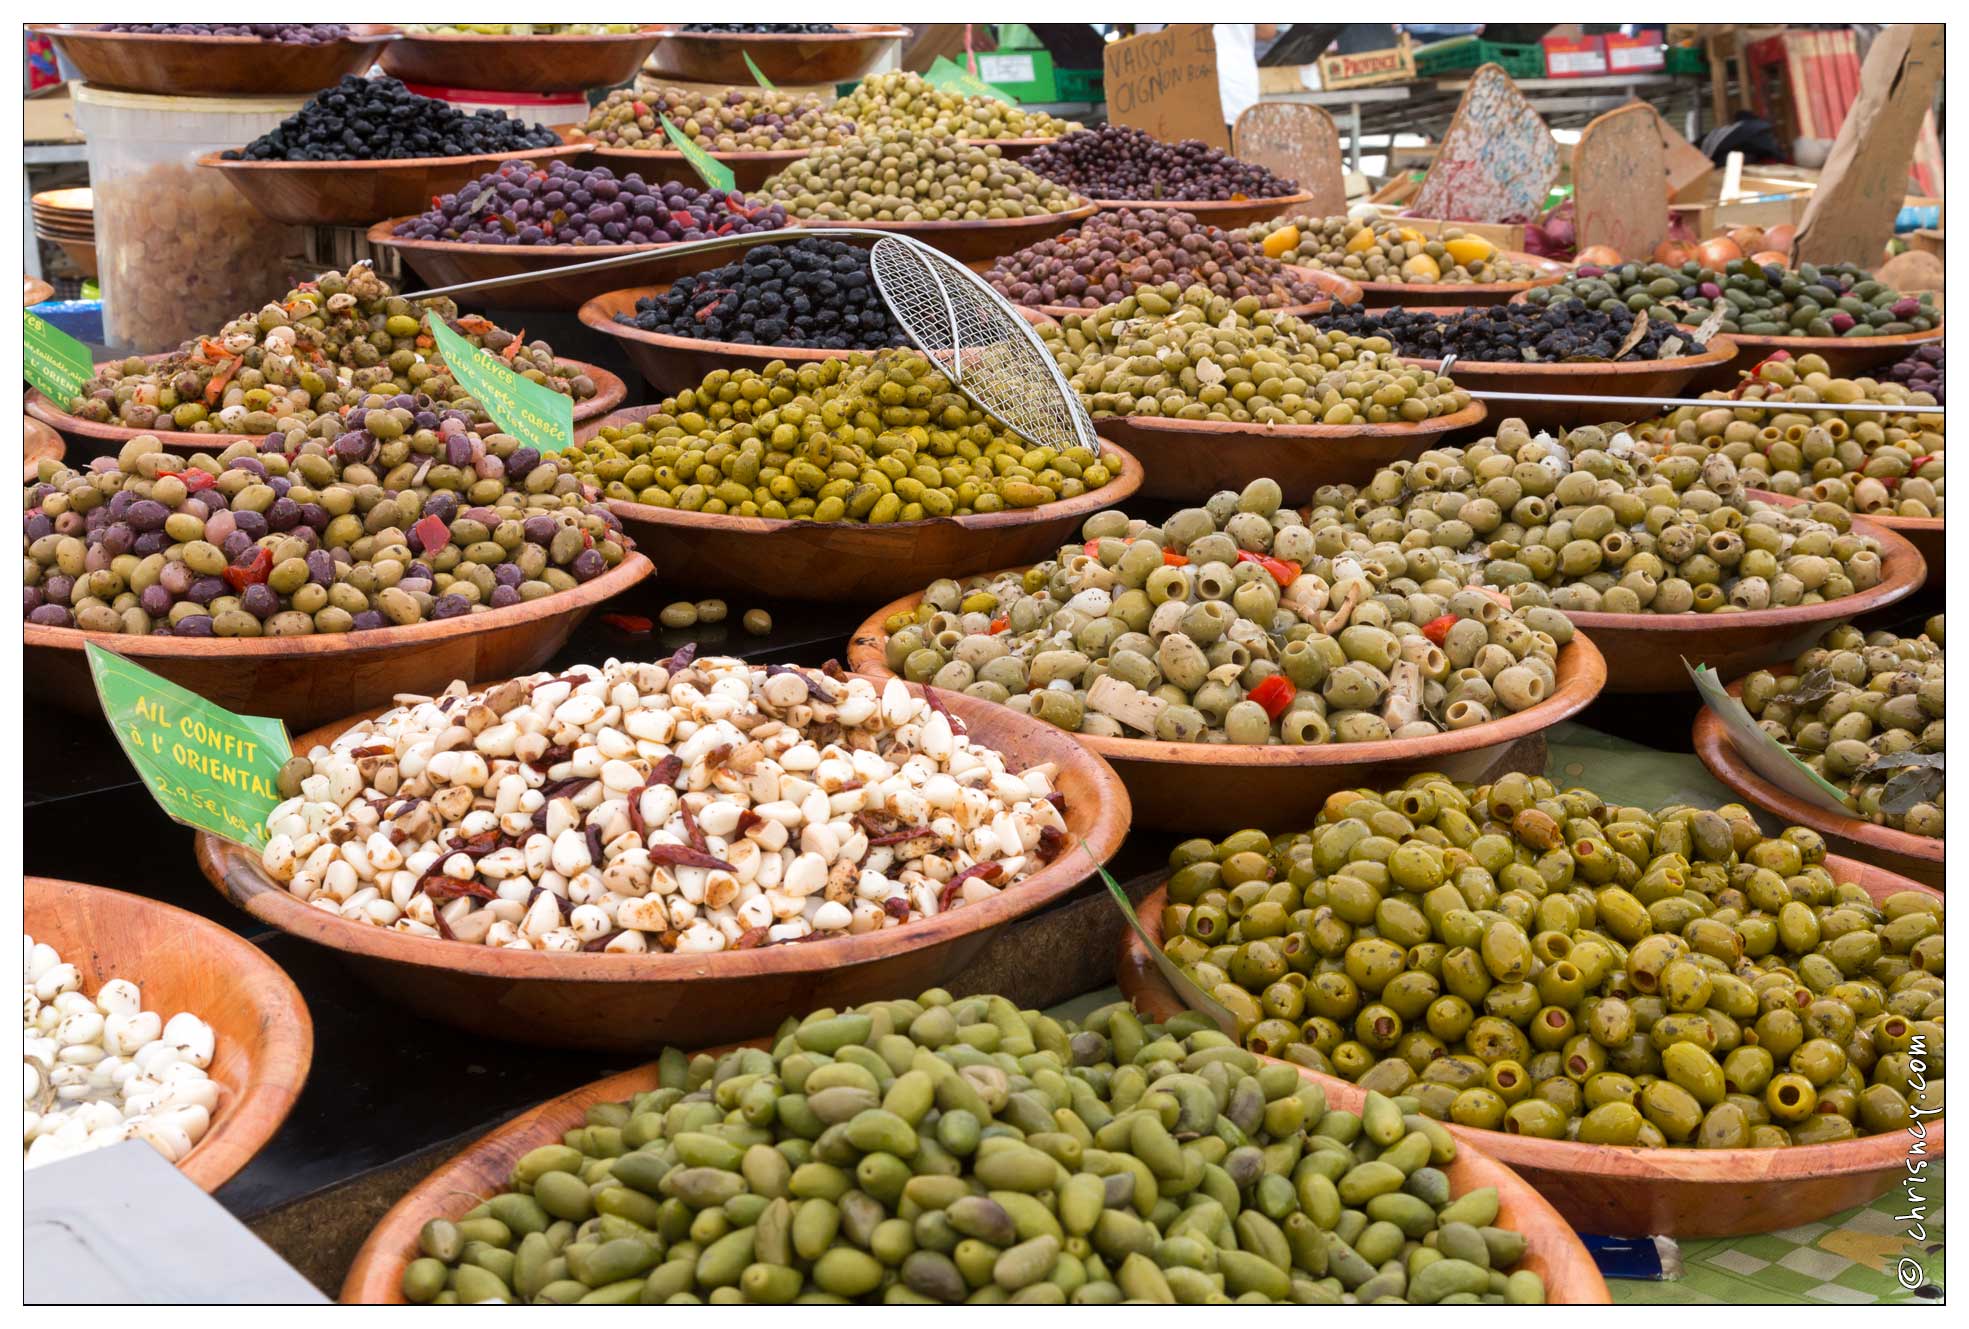 20170518-16_0180-Nyons_Marche_olives.jpg